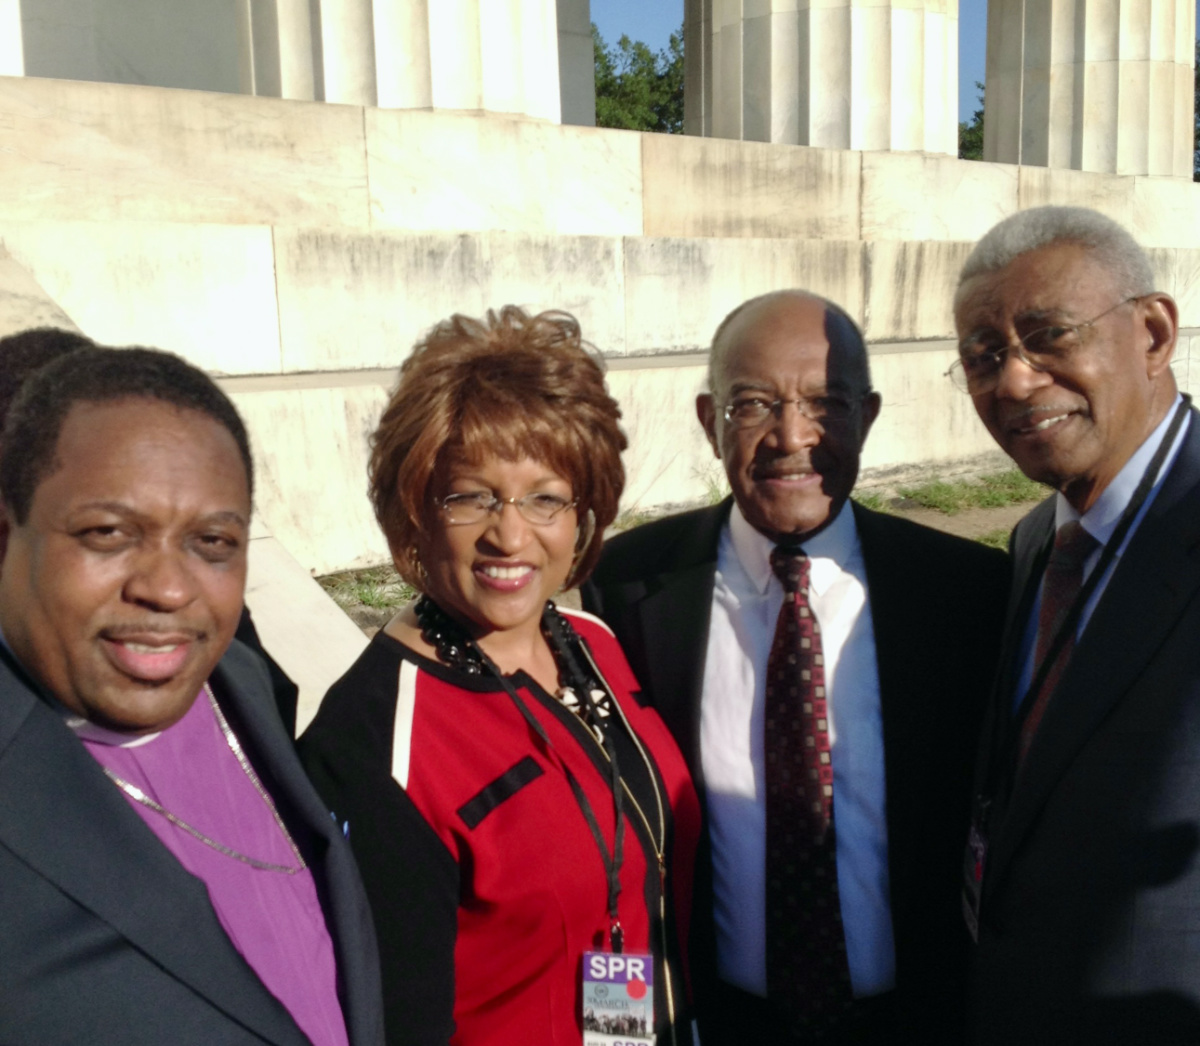 African Methodist Episcopal Zion Bishop W Darin Moore, from left, Bishop Vashti McKenzie, Rev James Forbes and Rev Otis Moss Jr pose together during a 50th anniversary celebration of the March on Washington in August 2013